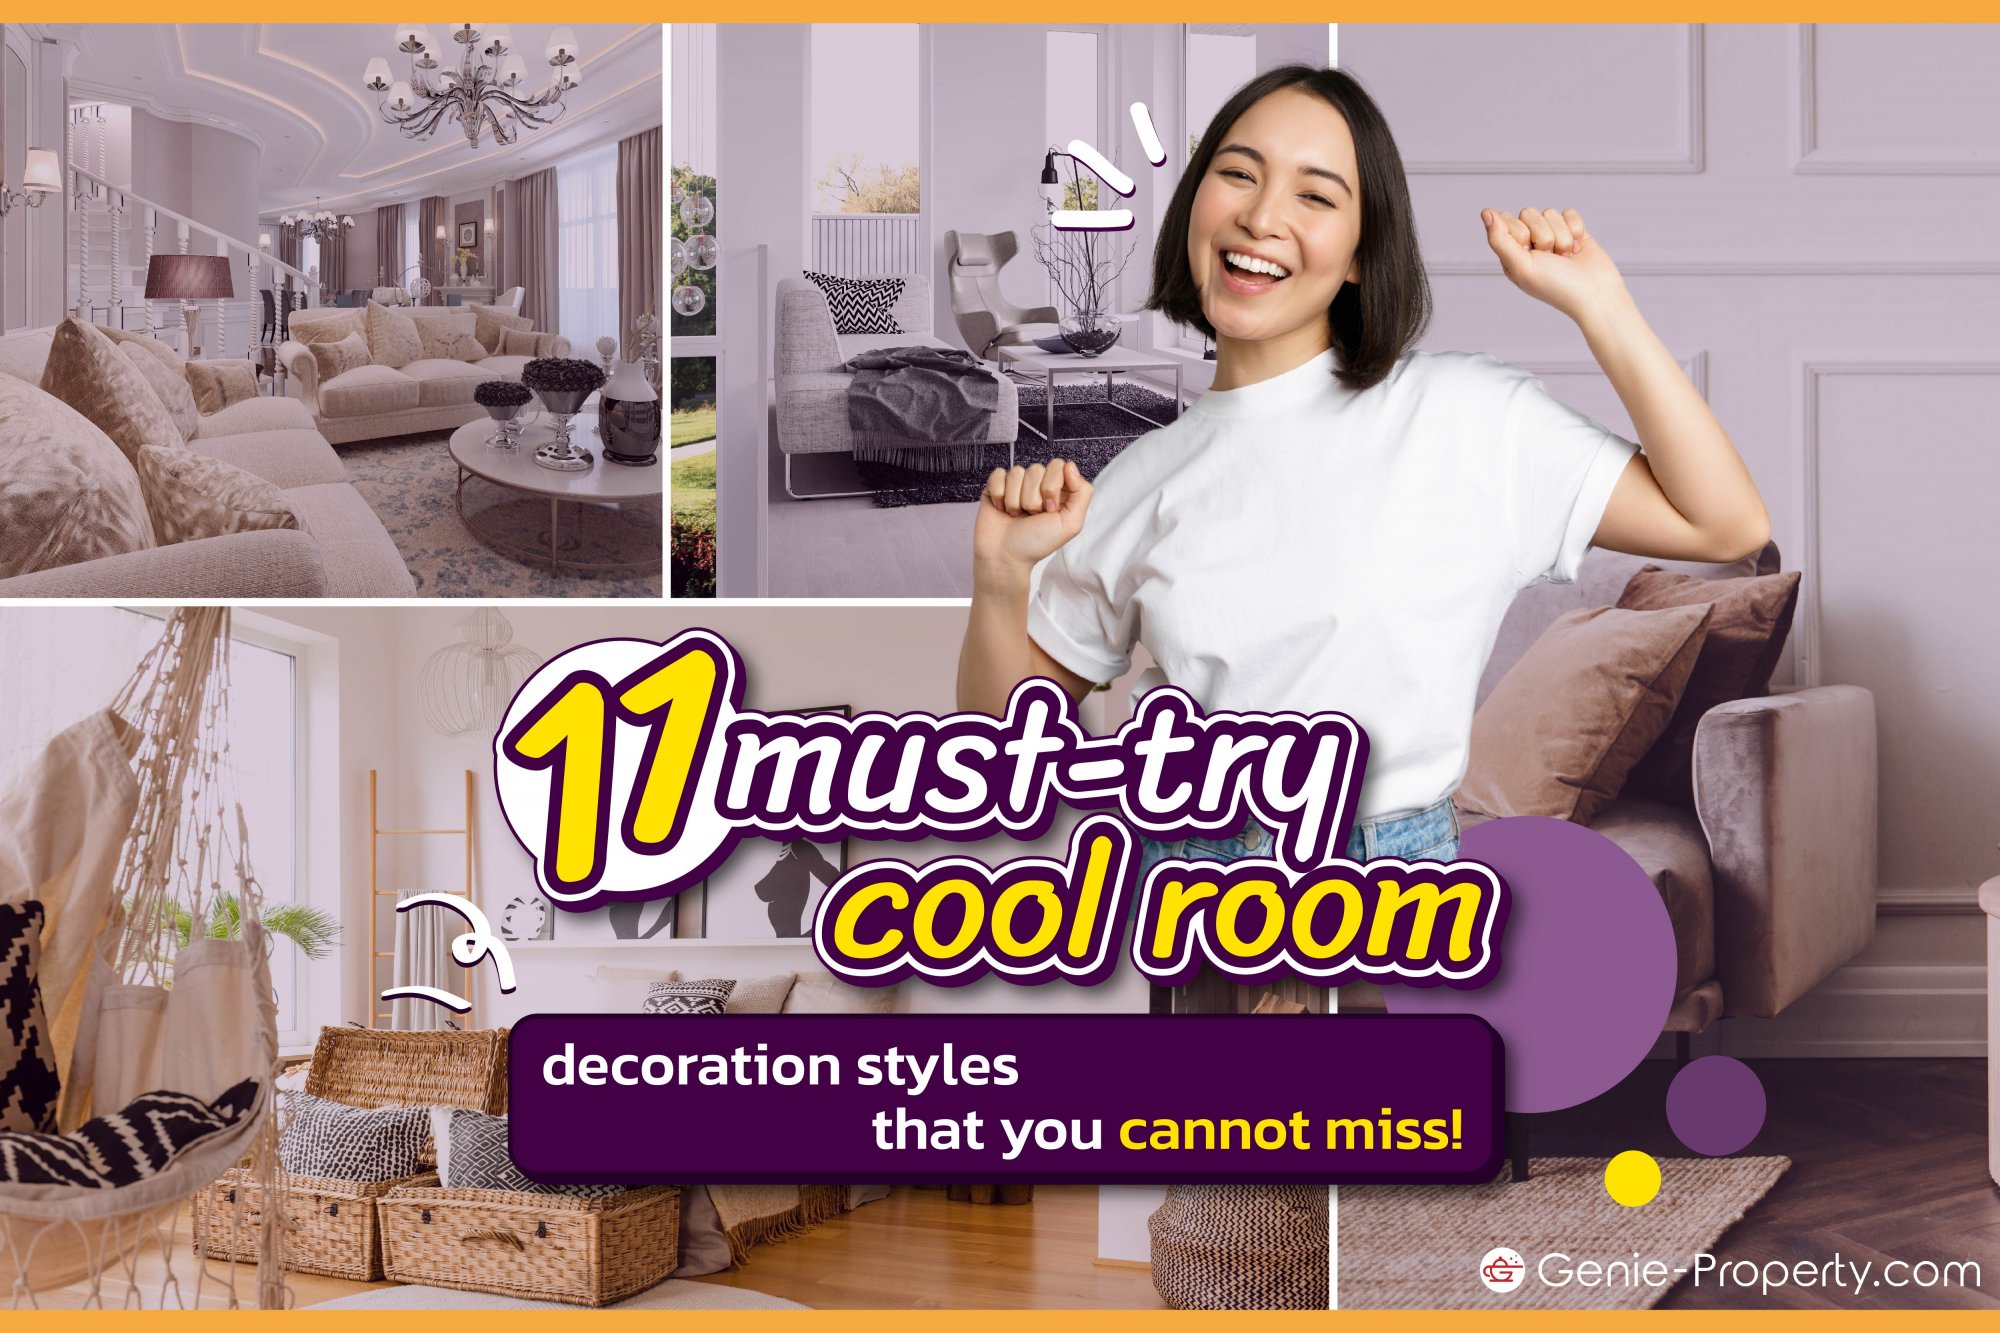 image for 11 must-try cool room decoration styles that you cannot miss!